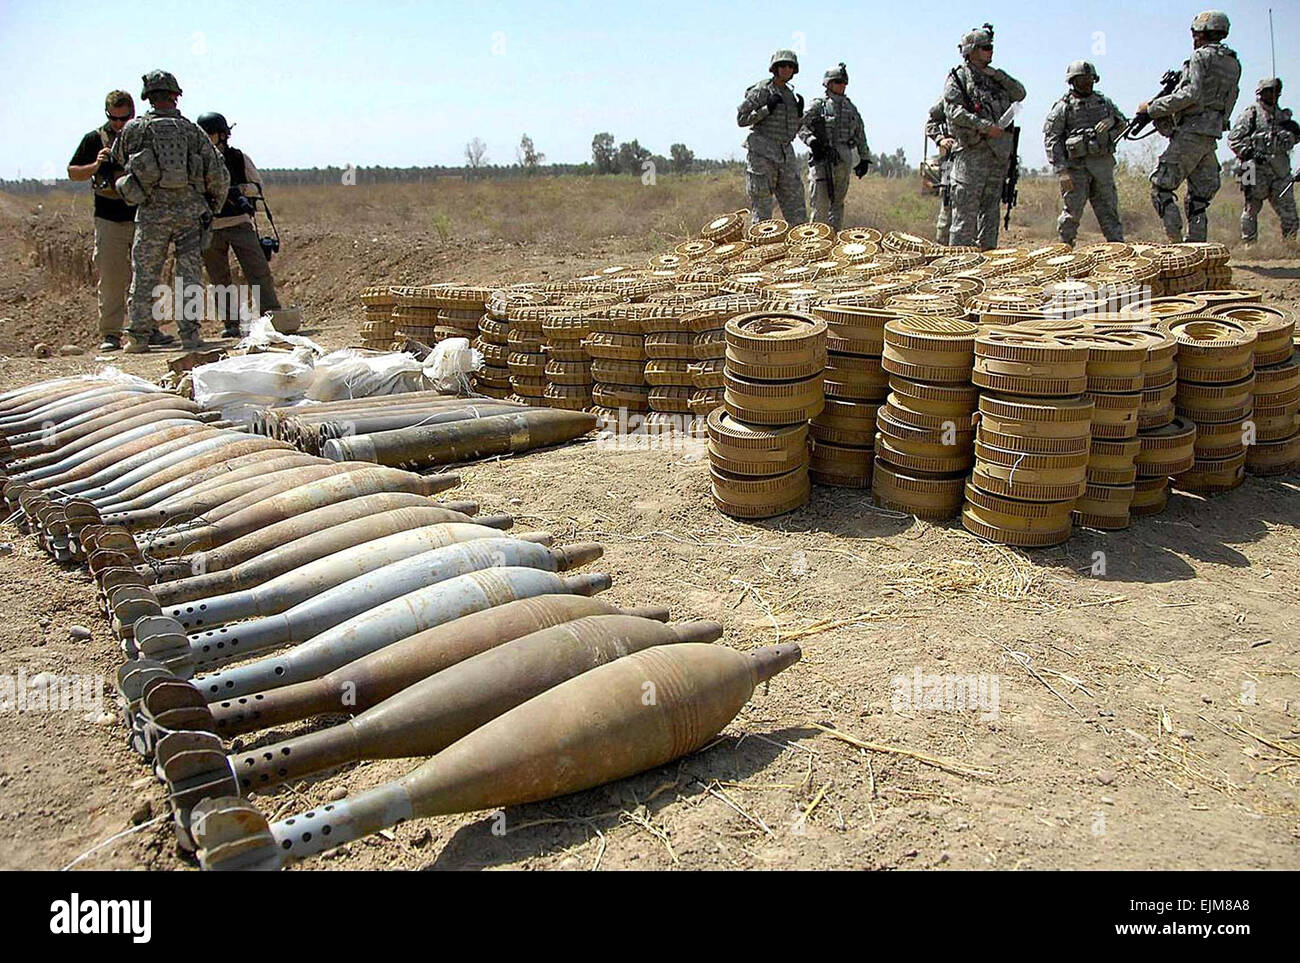 Iraqi National Police and U.S. Army soldiers transport seized weapons to Command Outpost Cashe April 13, 2008 near Abu Thayla, Iraq. Stock Photo